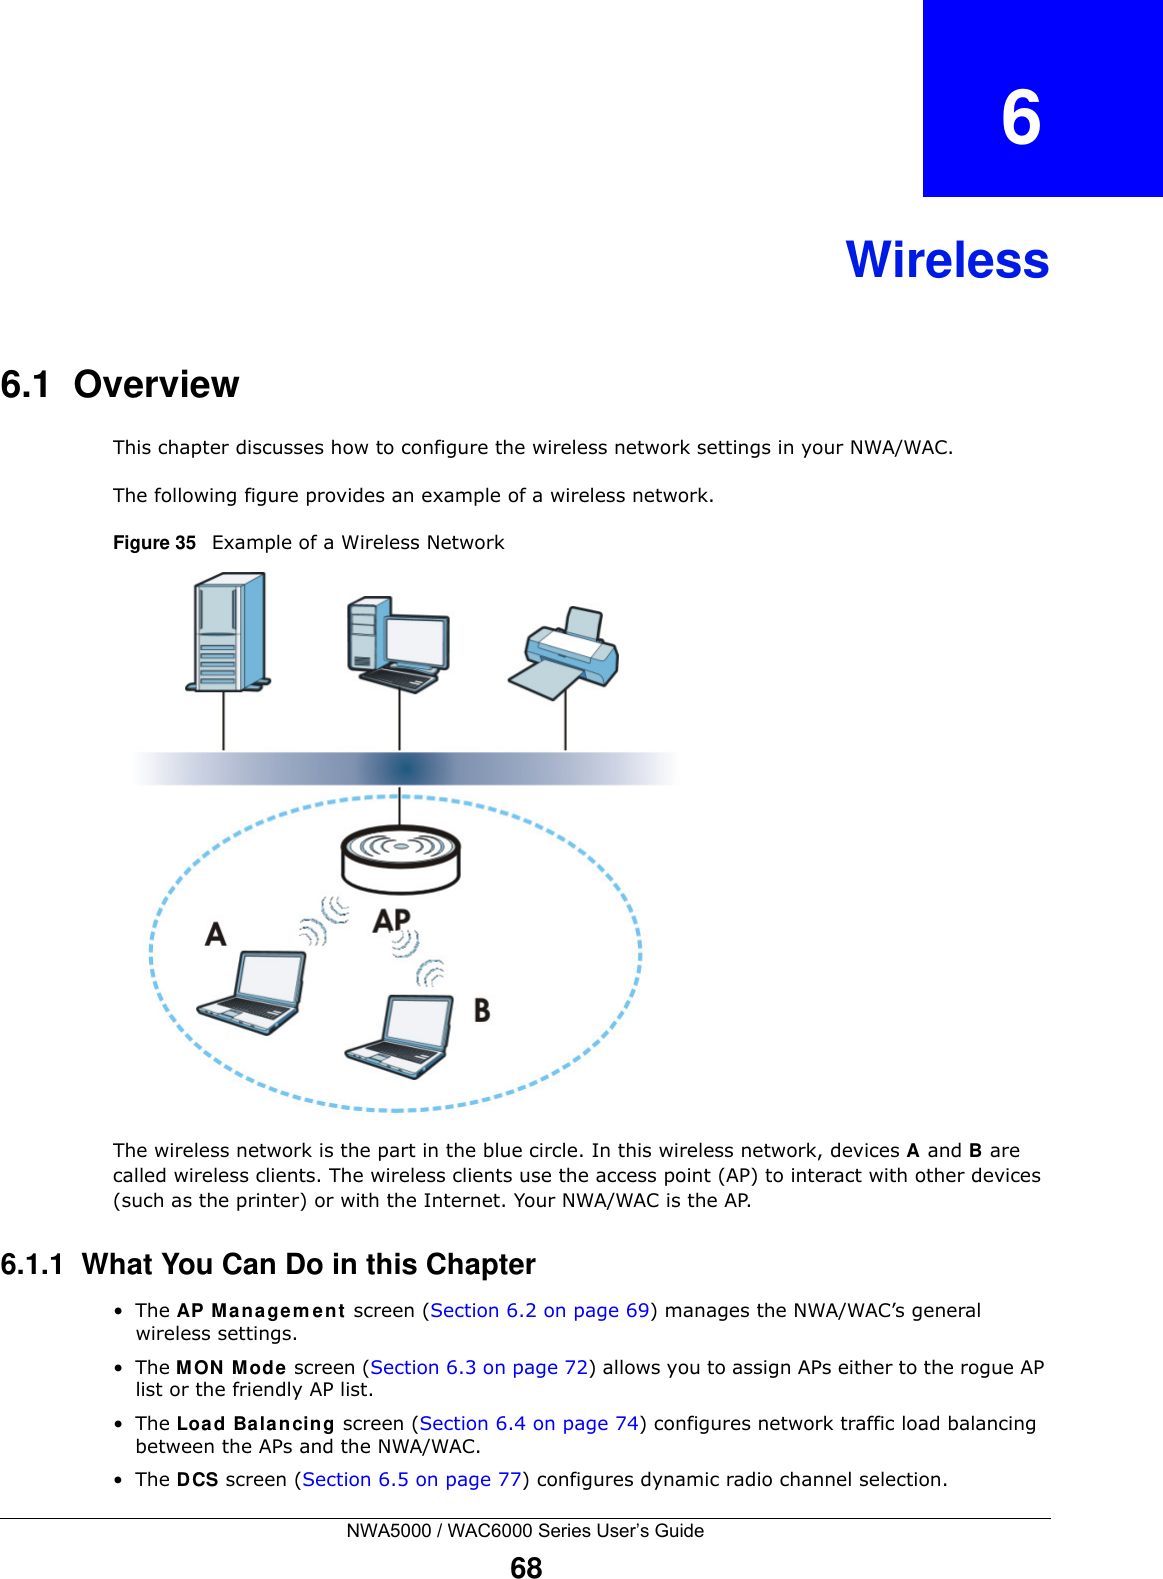 NWA5000 / WAC6000 Series User’s Guide68CHAPTER   6Wireless6.1  OverviewThis chapter discusses how to configure the wireless network settings in your NWA/WAC. The following figure provides an example of a wireless network.Figure 35   Example of a Wireless NetworkThe wireless network is the part in the blue circle. In this wireless network, devices A and B are called wireless clients. The wireless clients use the access point (AP) to interact with other devices (such as the printer) or with the Internet. Your NWA/WAC is the AP.6.1.1  What You Can Do in this Chapter•The AP Management screen (Section 6.2 on page 69) manages the NWA/WAC’s general wireless settings.•The MON Mode screen (Section 6.3 on page 72) allows you to assign APs either to the rogue AP list or the friendly AP list.•The Load Balancing screen (Section 6.4 on page 74) configures network traffic load balancing between the APs and the NWA/WAC. •The DCS screen (Section 6.5 on page 77) configures dynamic radio channel selection.